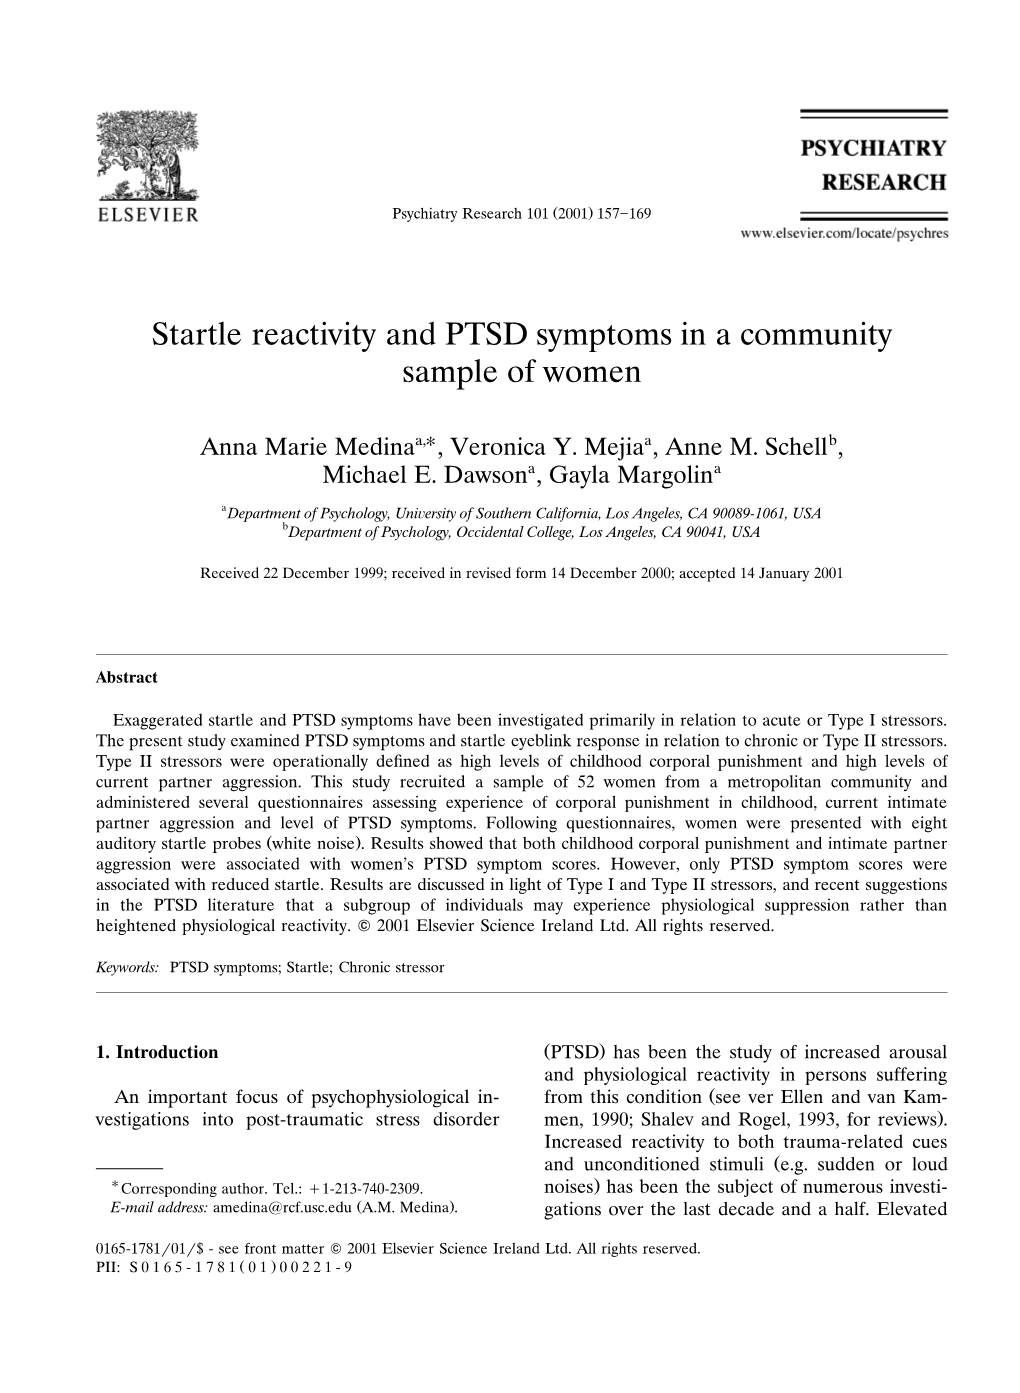 Startle Reactivity and PTSD Symptoms in a Community Sample of Women